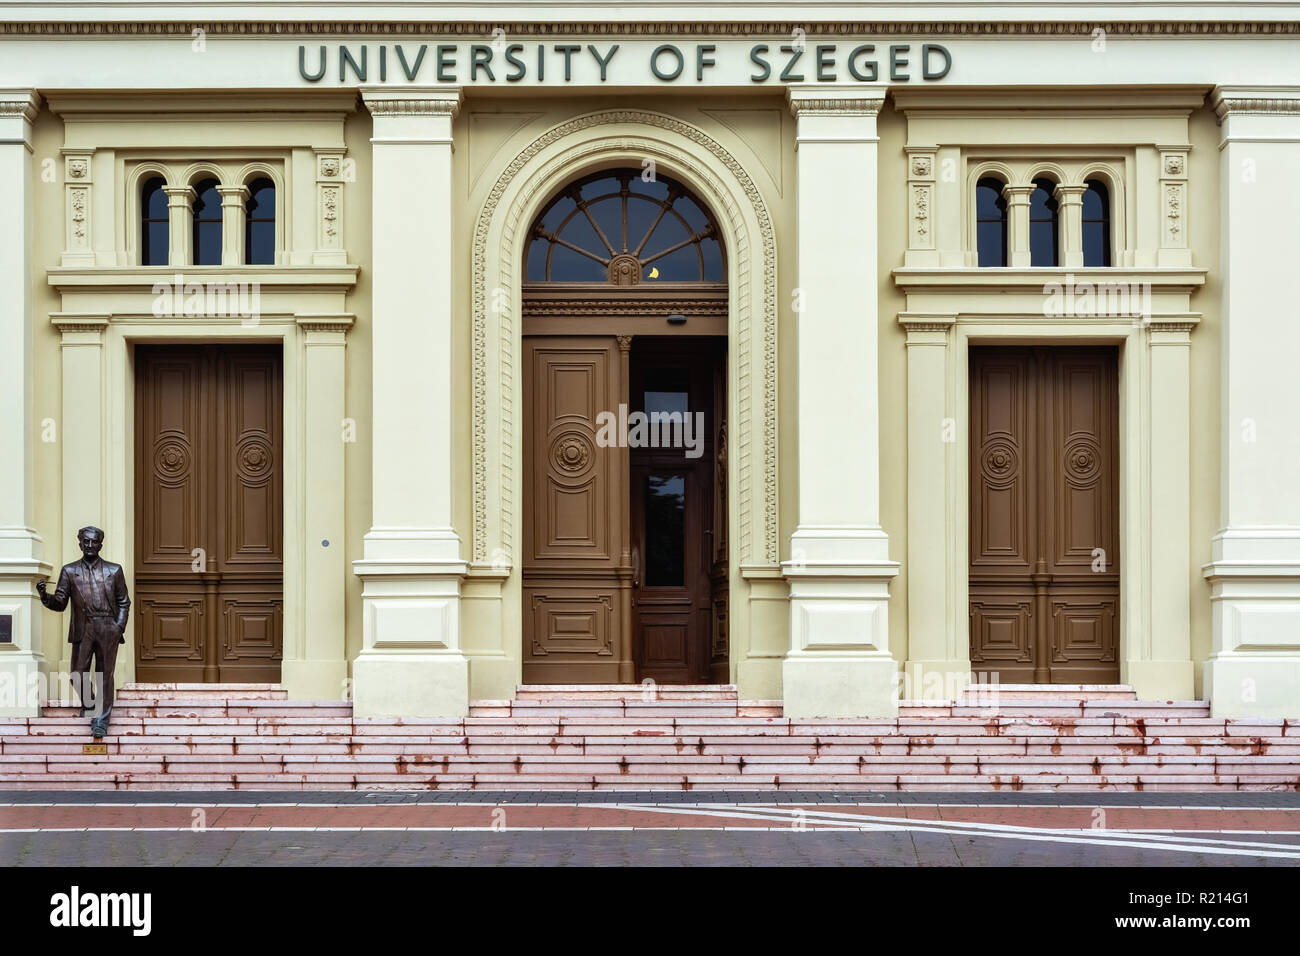 Szeged, Hungary, June 28: Image of the main entrance to the building of the University of Szeged with a figure depicting a teacher standing on the ste Stock Photo